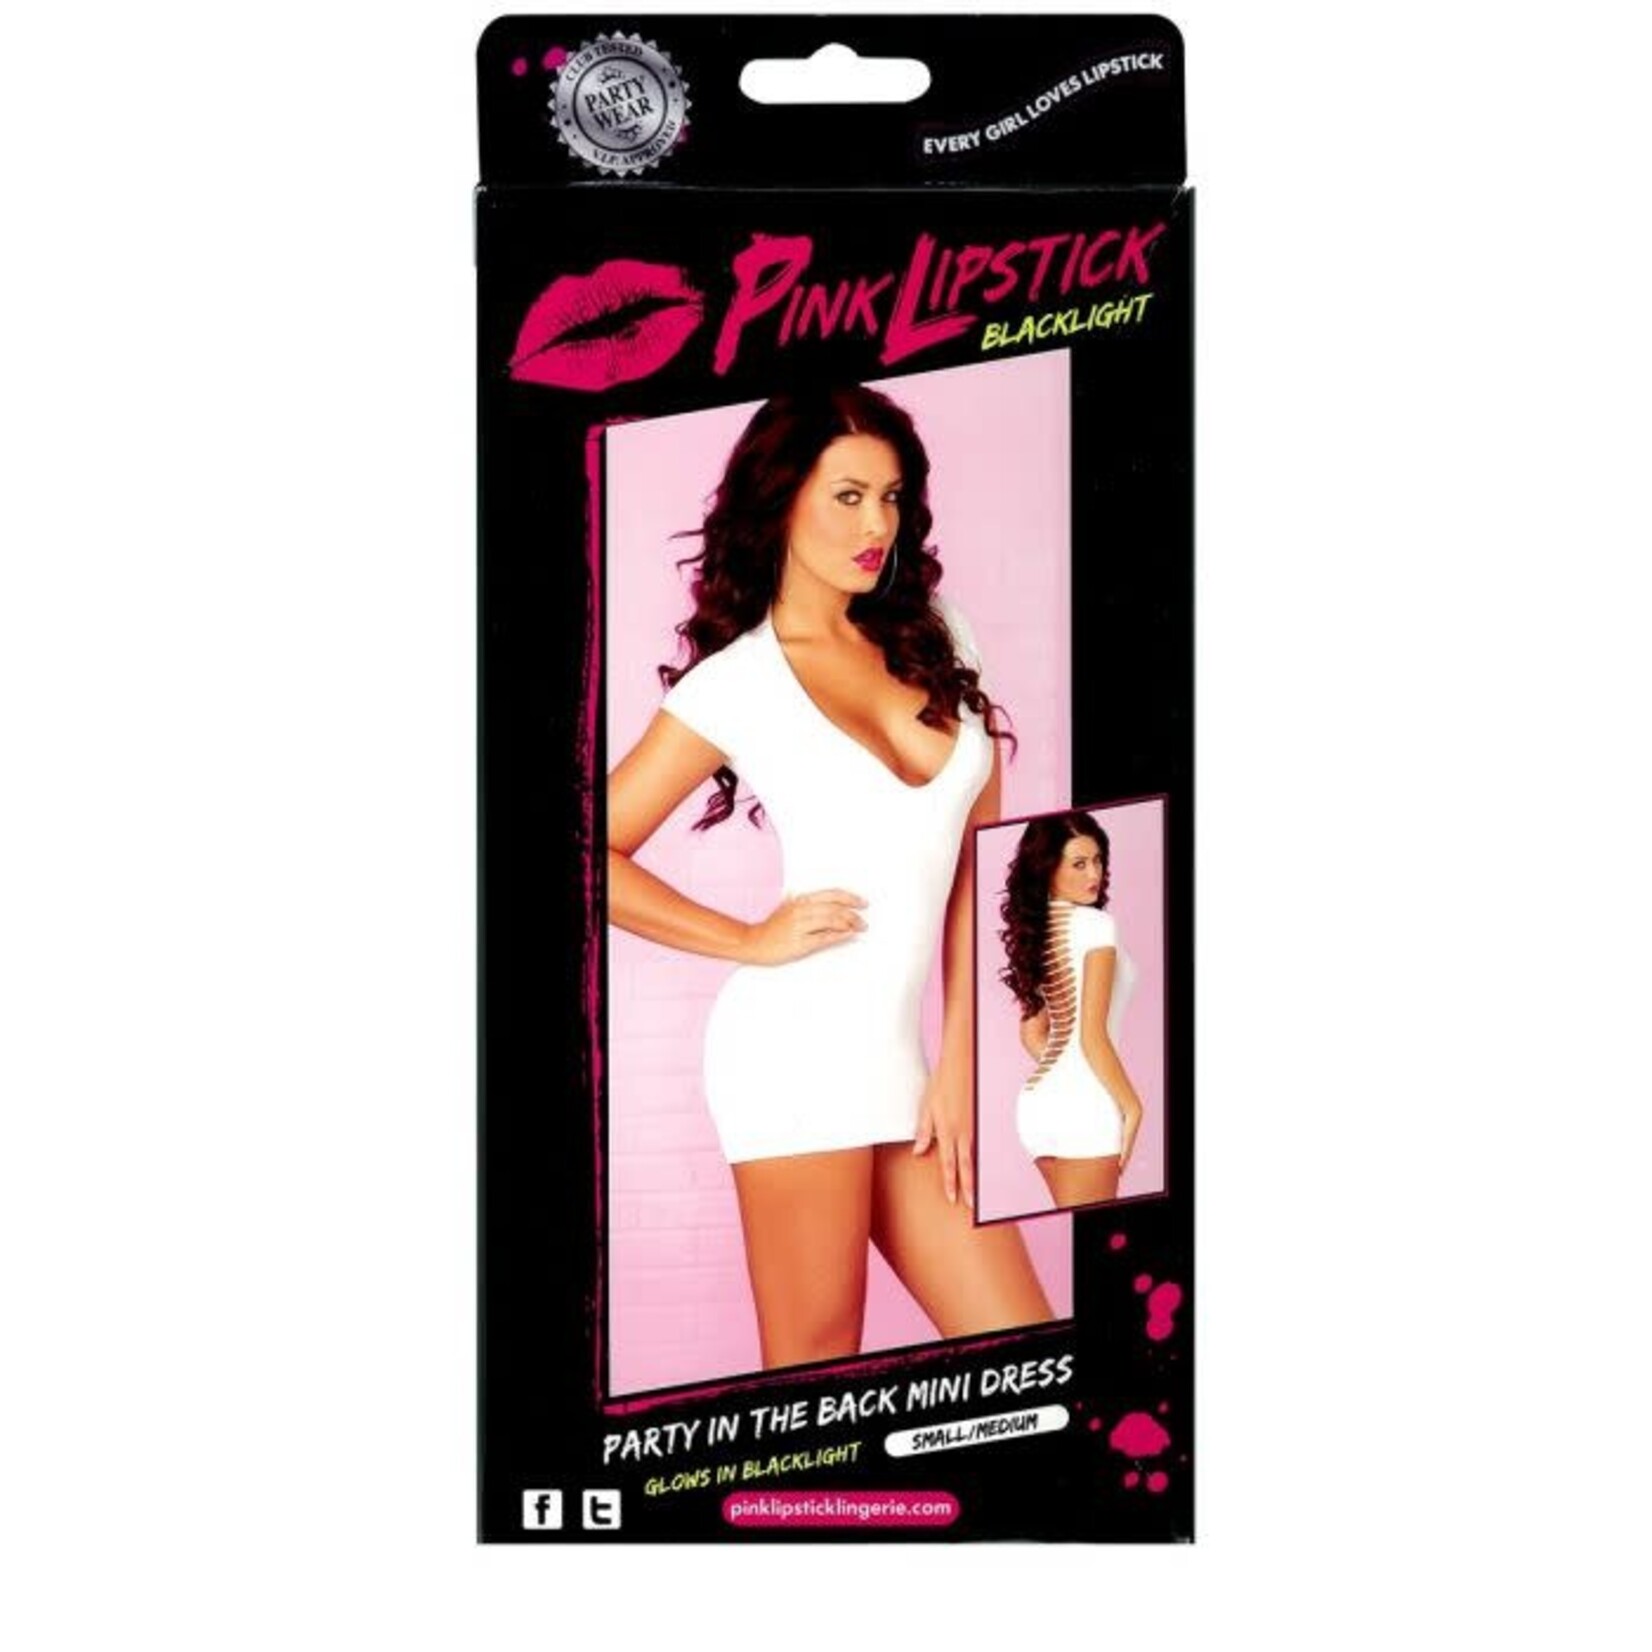 PINK LIPSTICK PINK LIPSTICK PARTY IN THE BACK MINI DRESS - WHITE - S/M